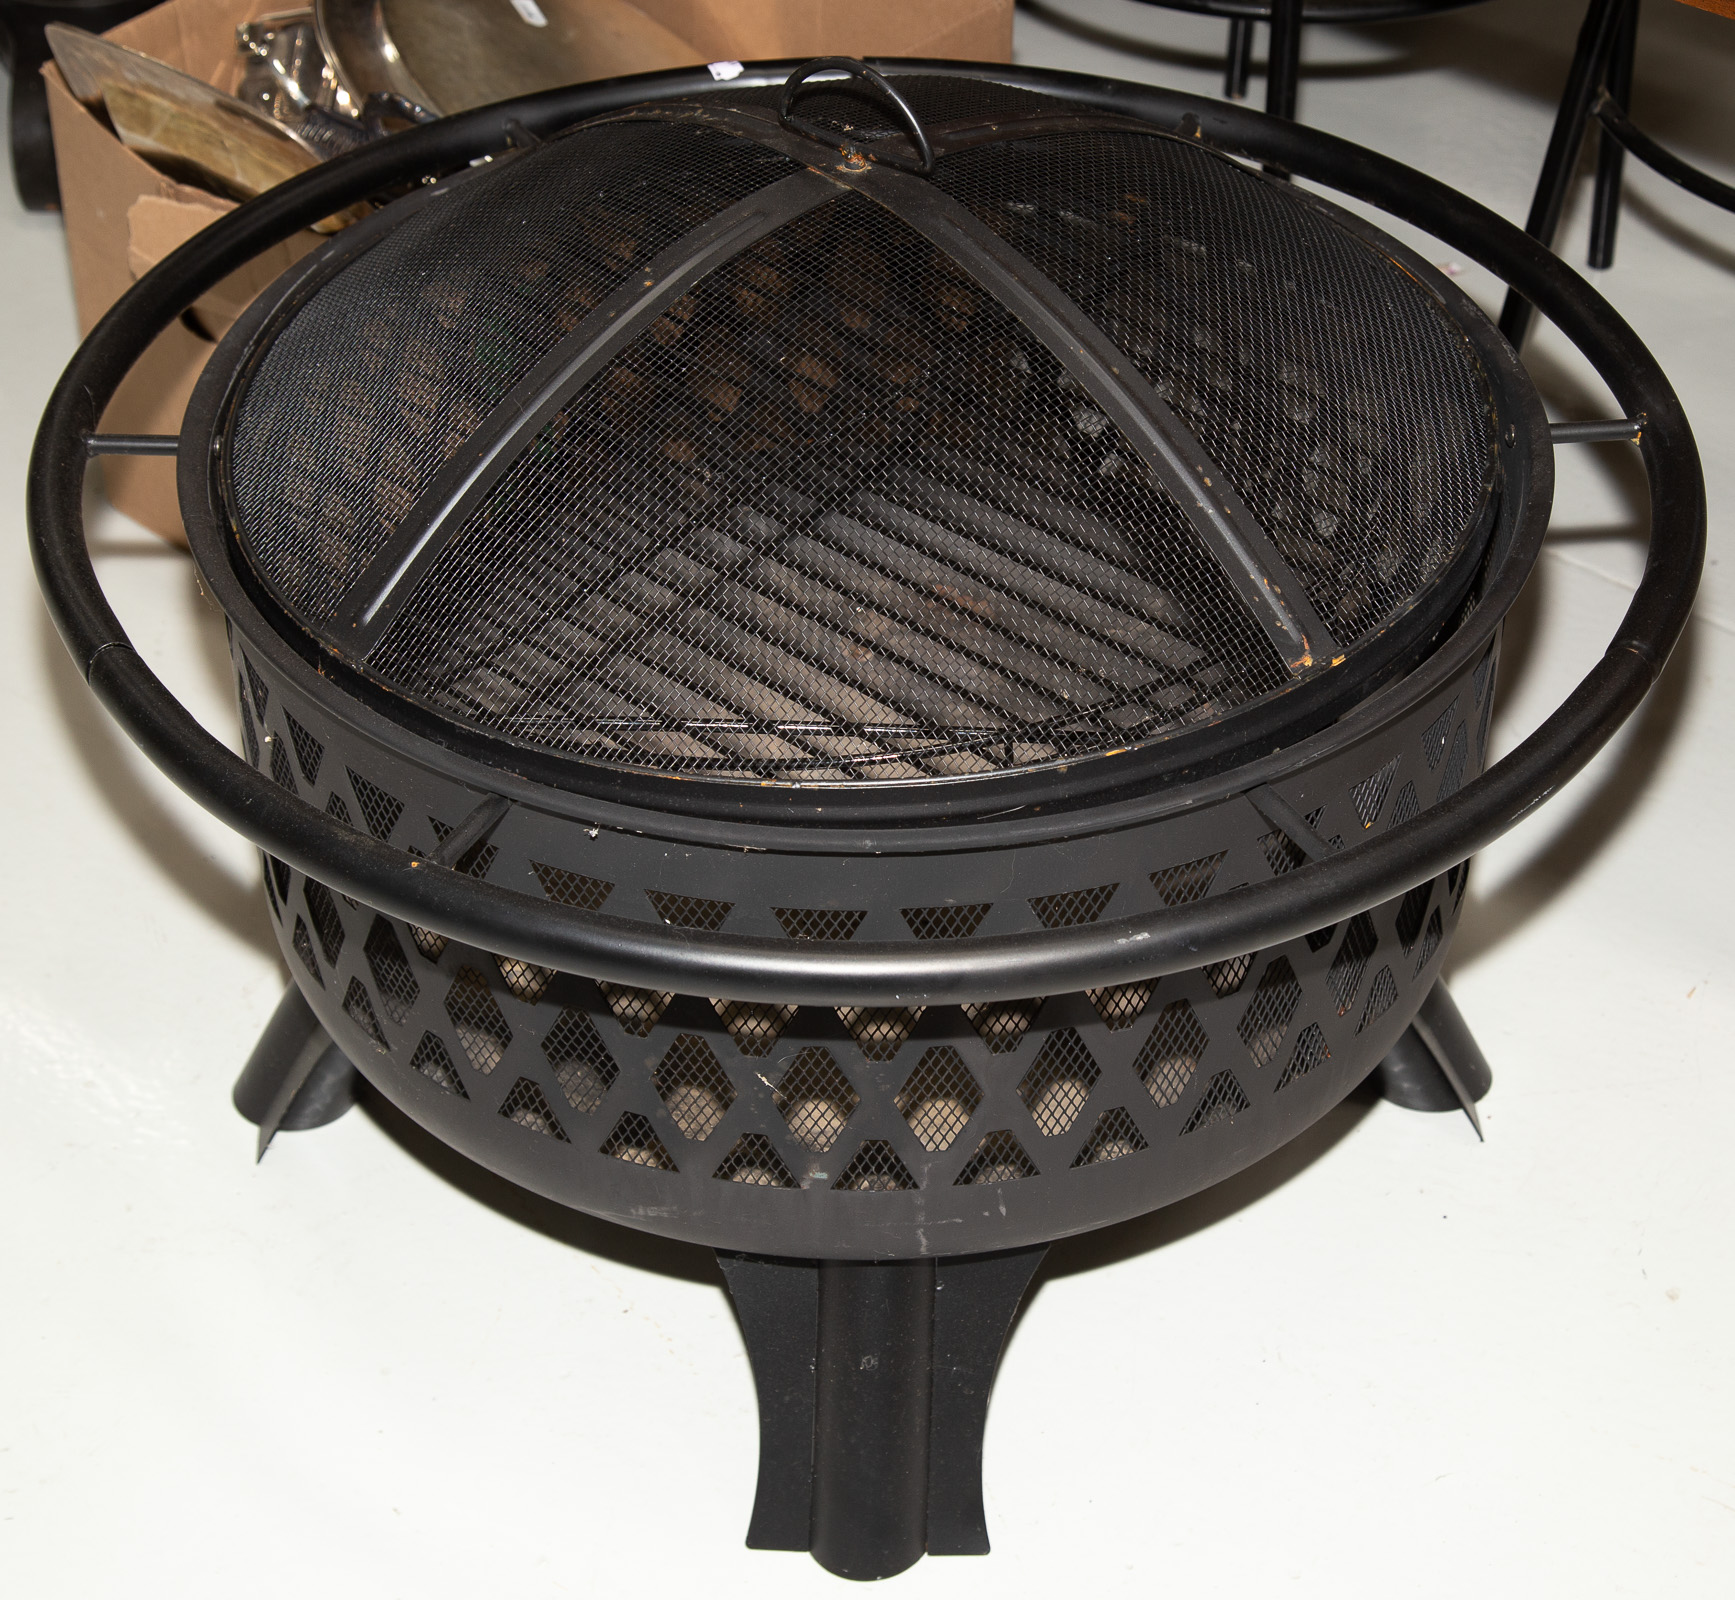 CONTEMPORARY FIRE PIT With cooking